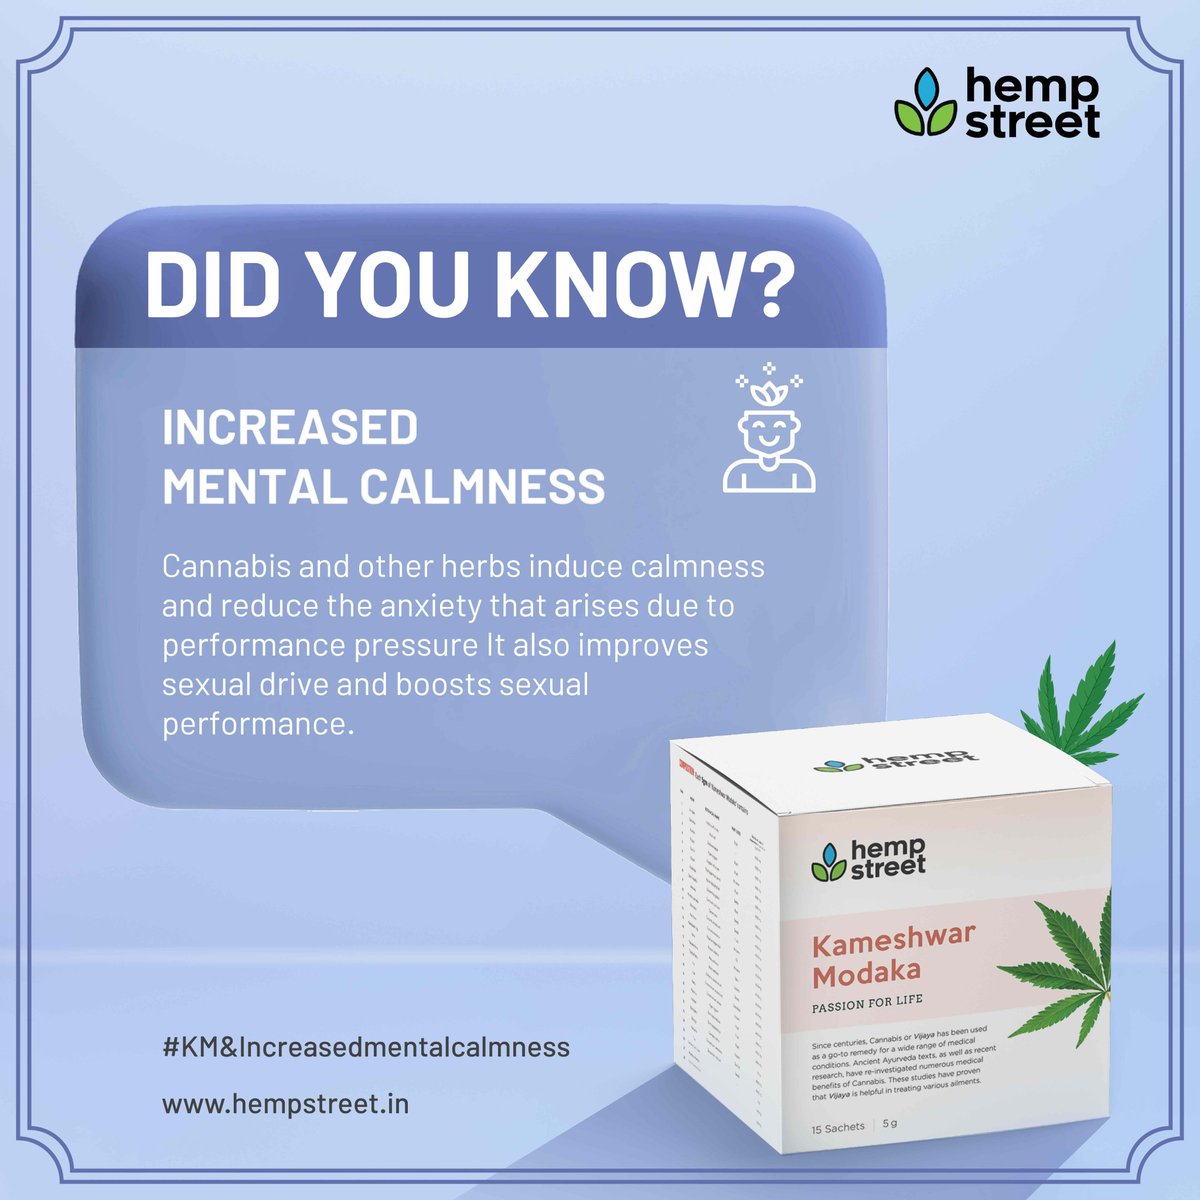 Did you know to induce calmness and reduce anxiety?
 
#didyouknow #facts #fact #knowledge #health #patientfirst #healthcare #cannabis #ayurveda #sexualhealth #sexeducation #sexpositive #sexualwellness #pleasure #intimacy